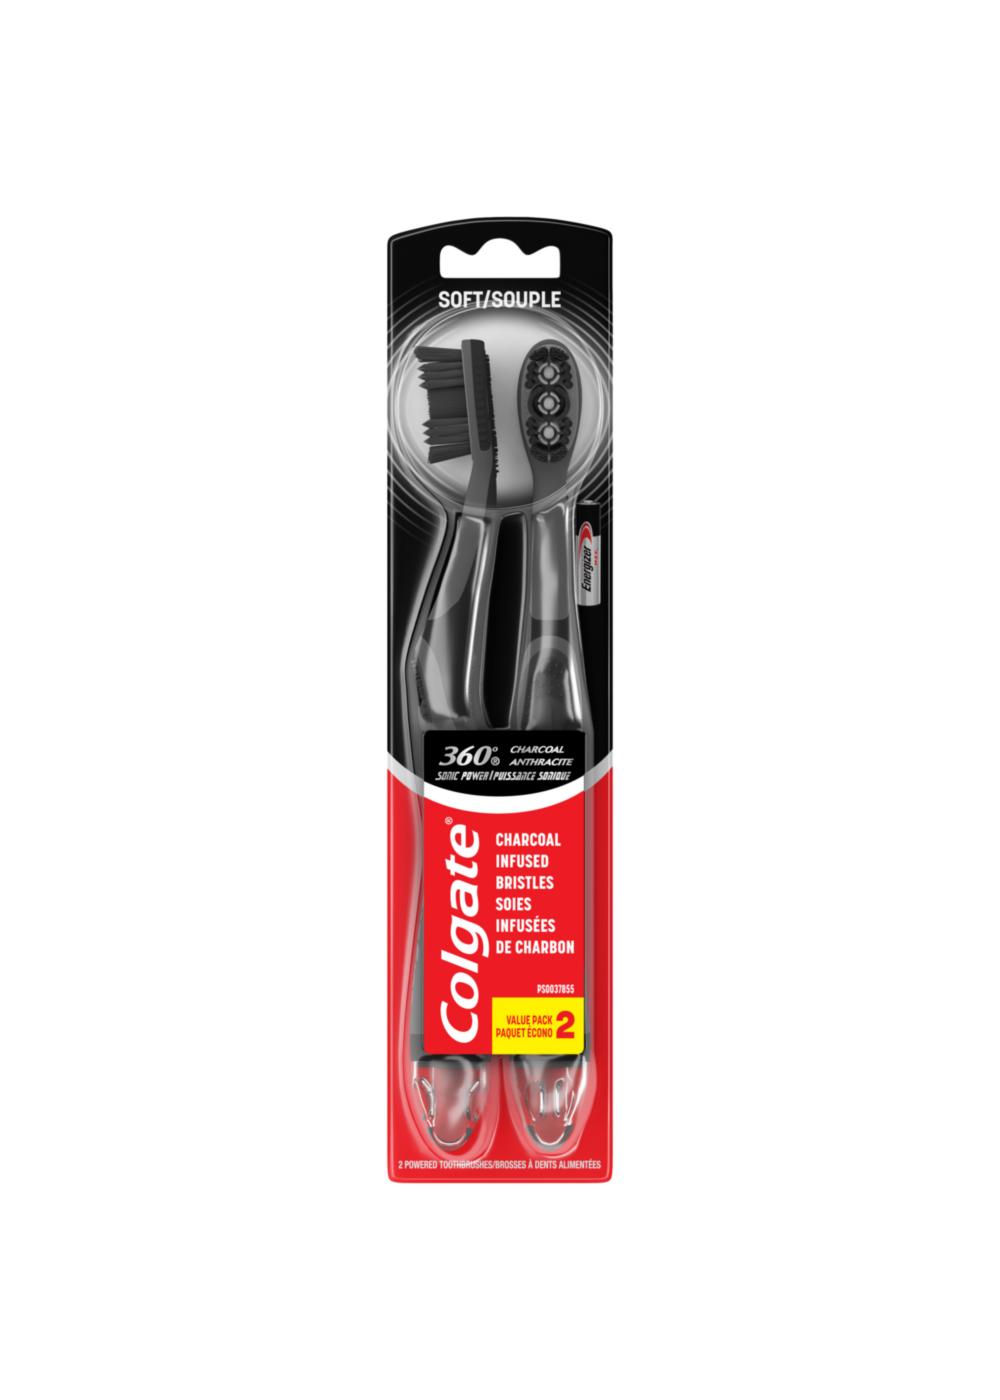 Colgate 360° Charcoal Sonic Power Toothbrushes - Soft; image 1 of 4